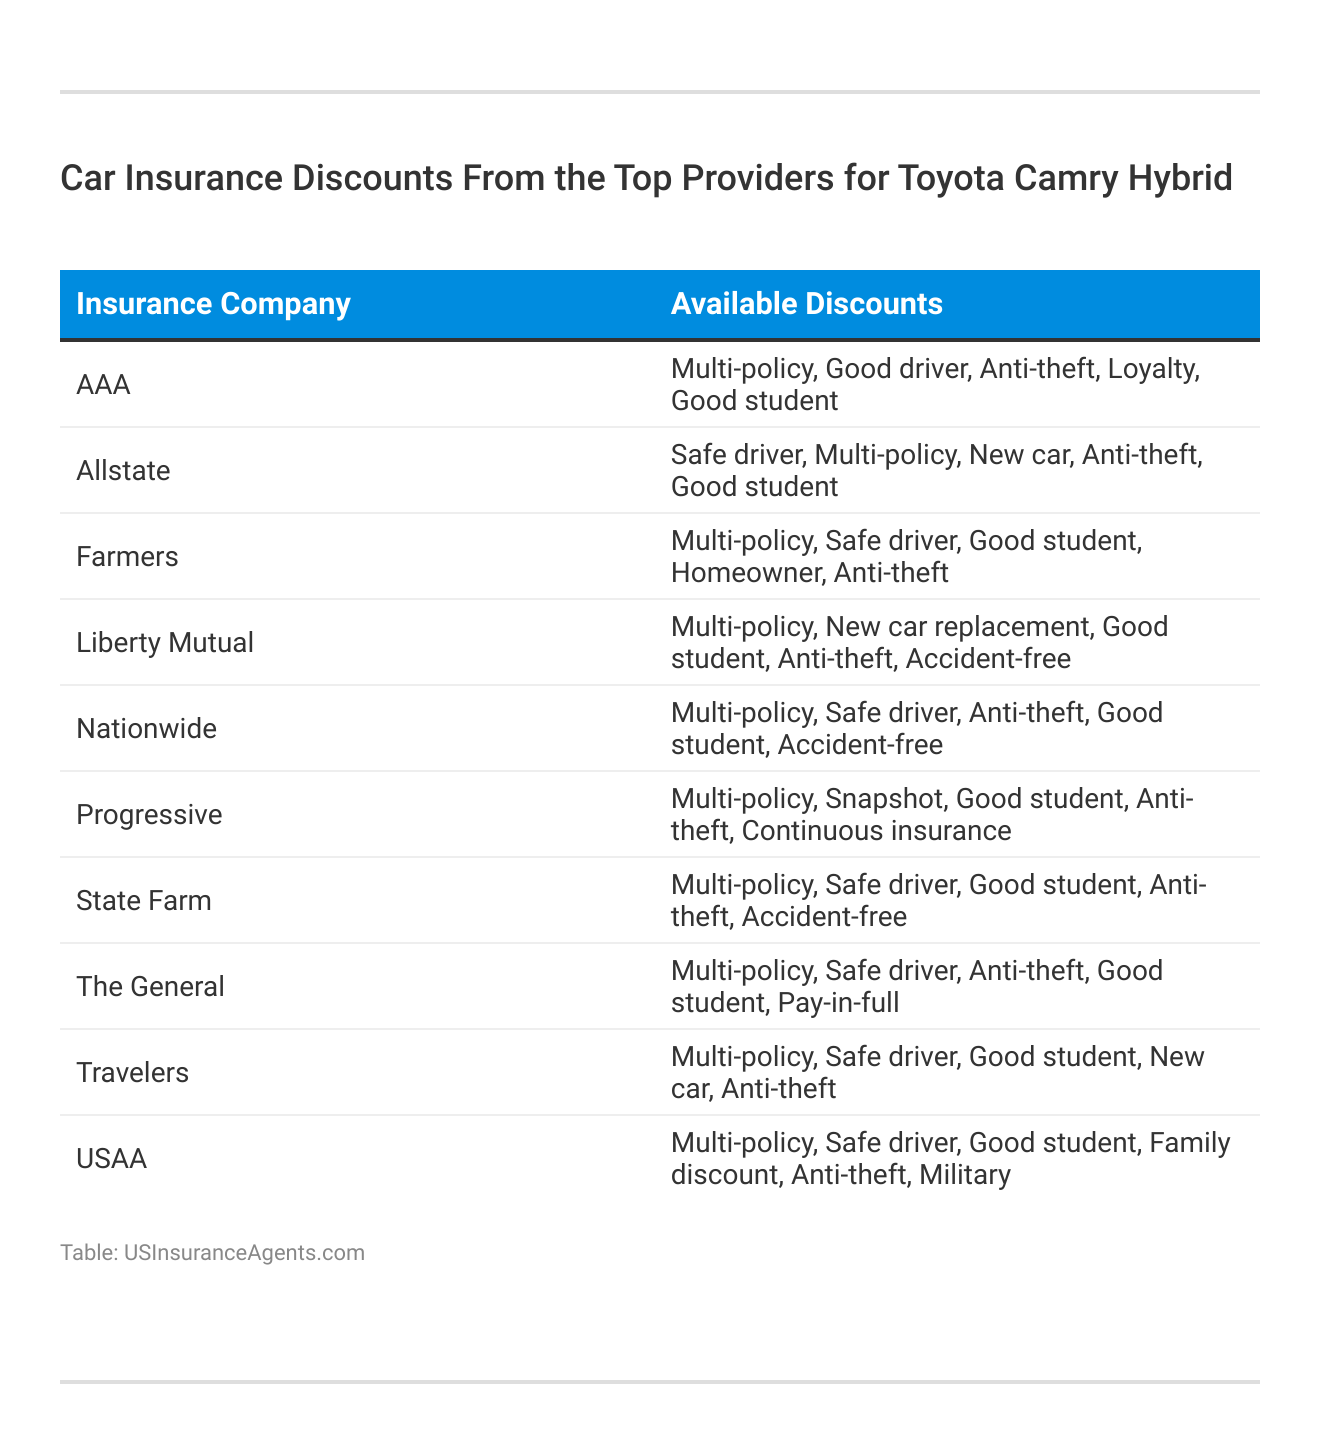 <h3>Car Insurance Discounts From the Top Providers for Toyota Camry Hybrid</h3>